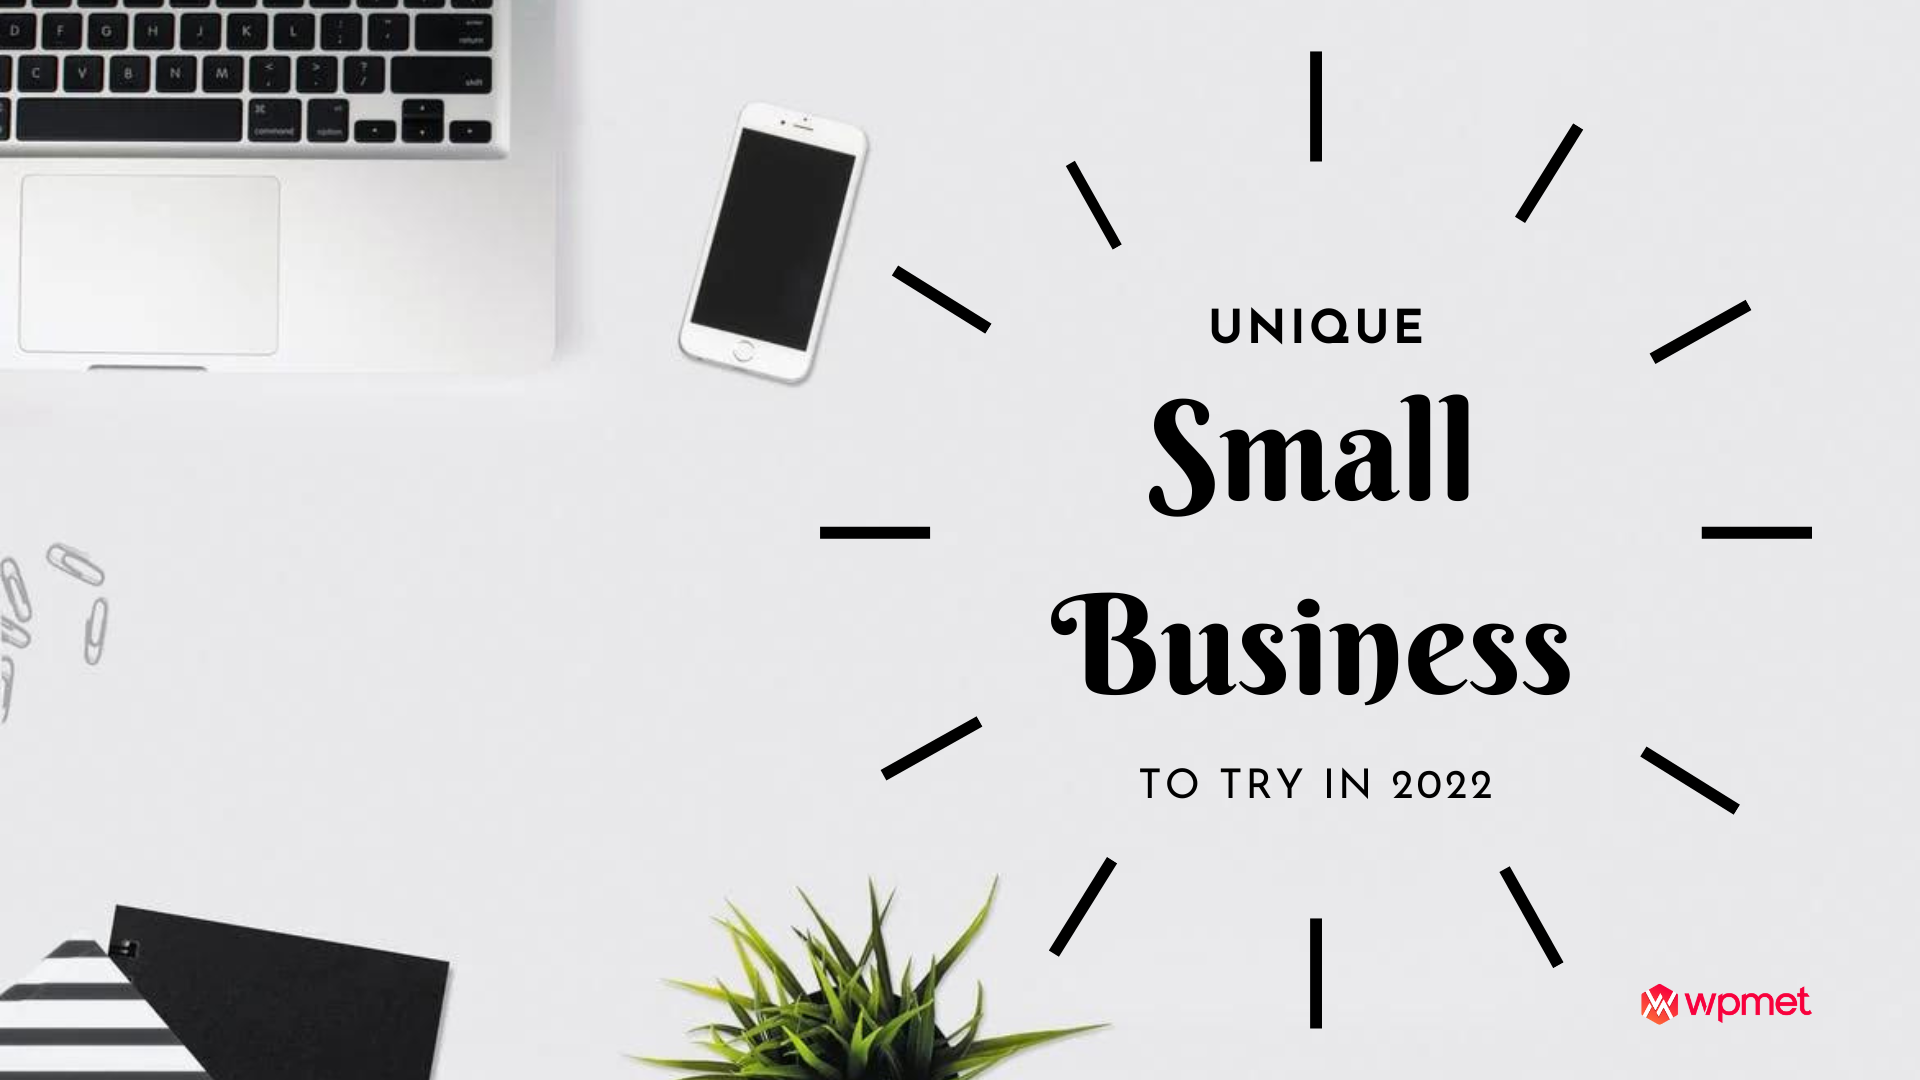 30 Unique Small Business Ideas You Should Try in 2022